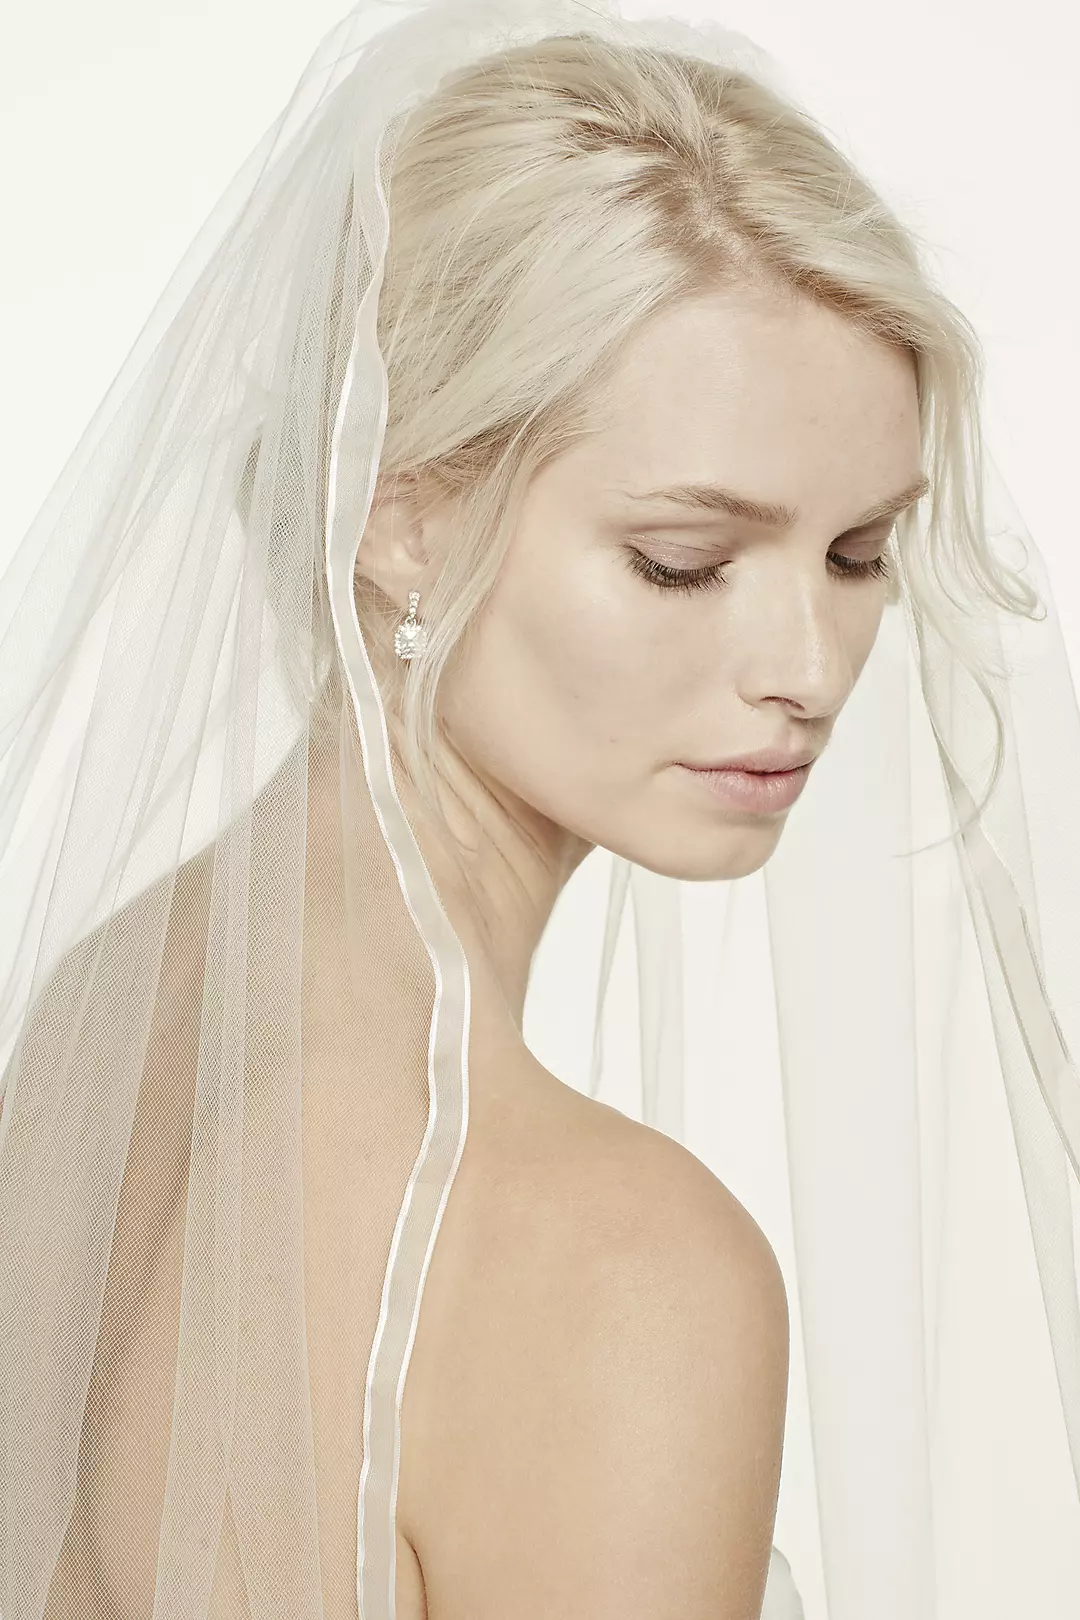 One Tier Mid Veil with Organza Ribbon Edge Image